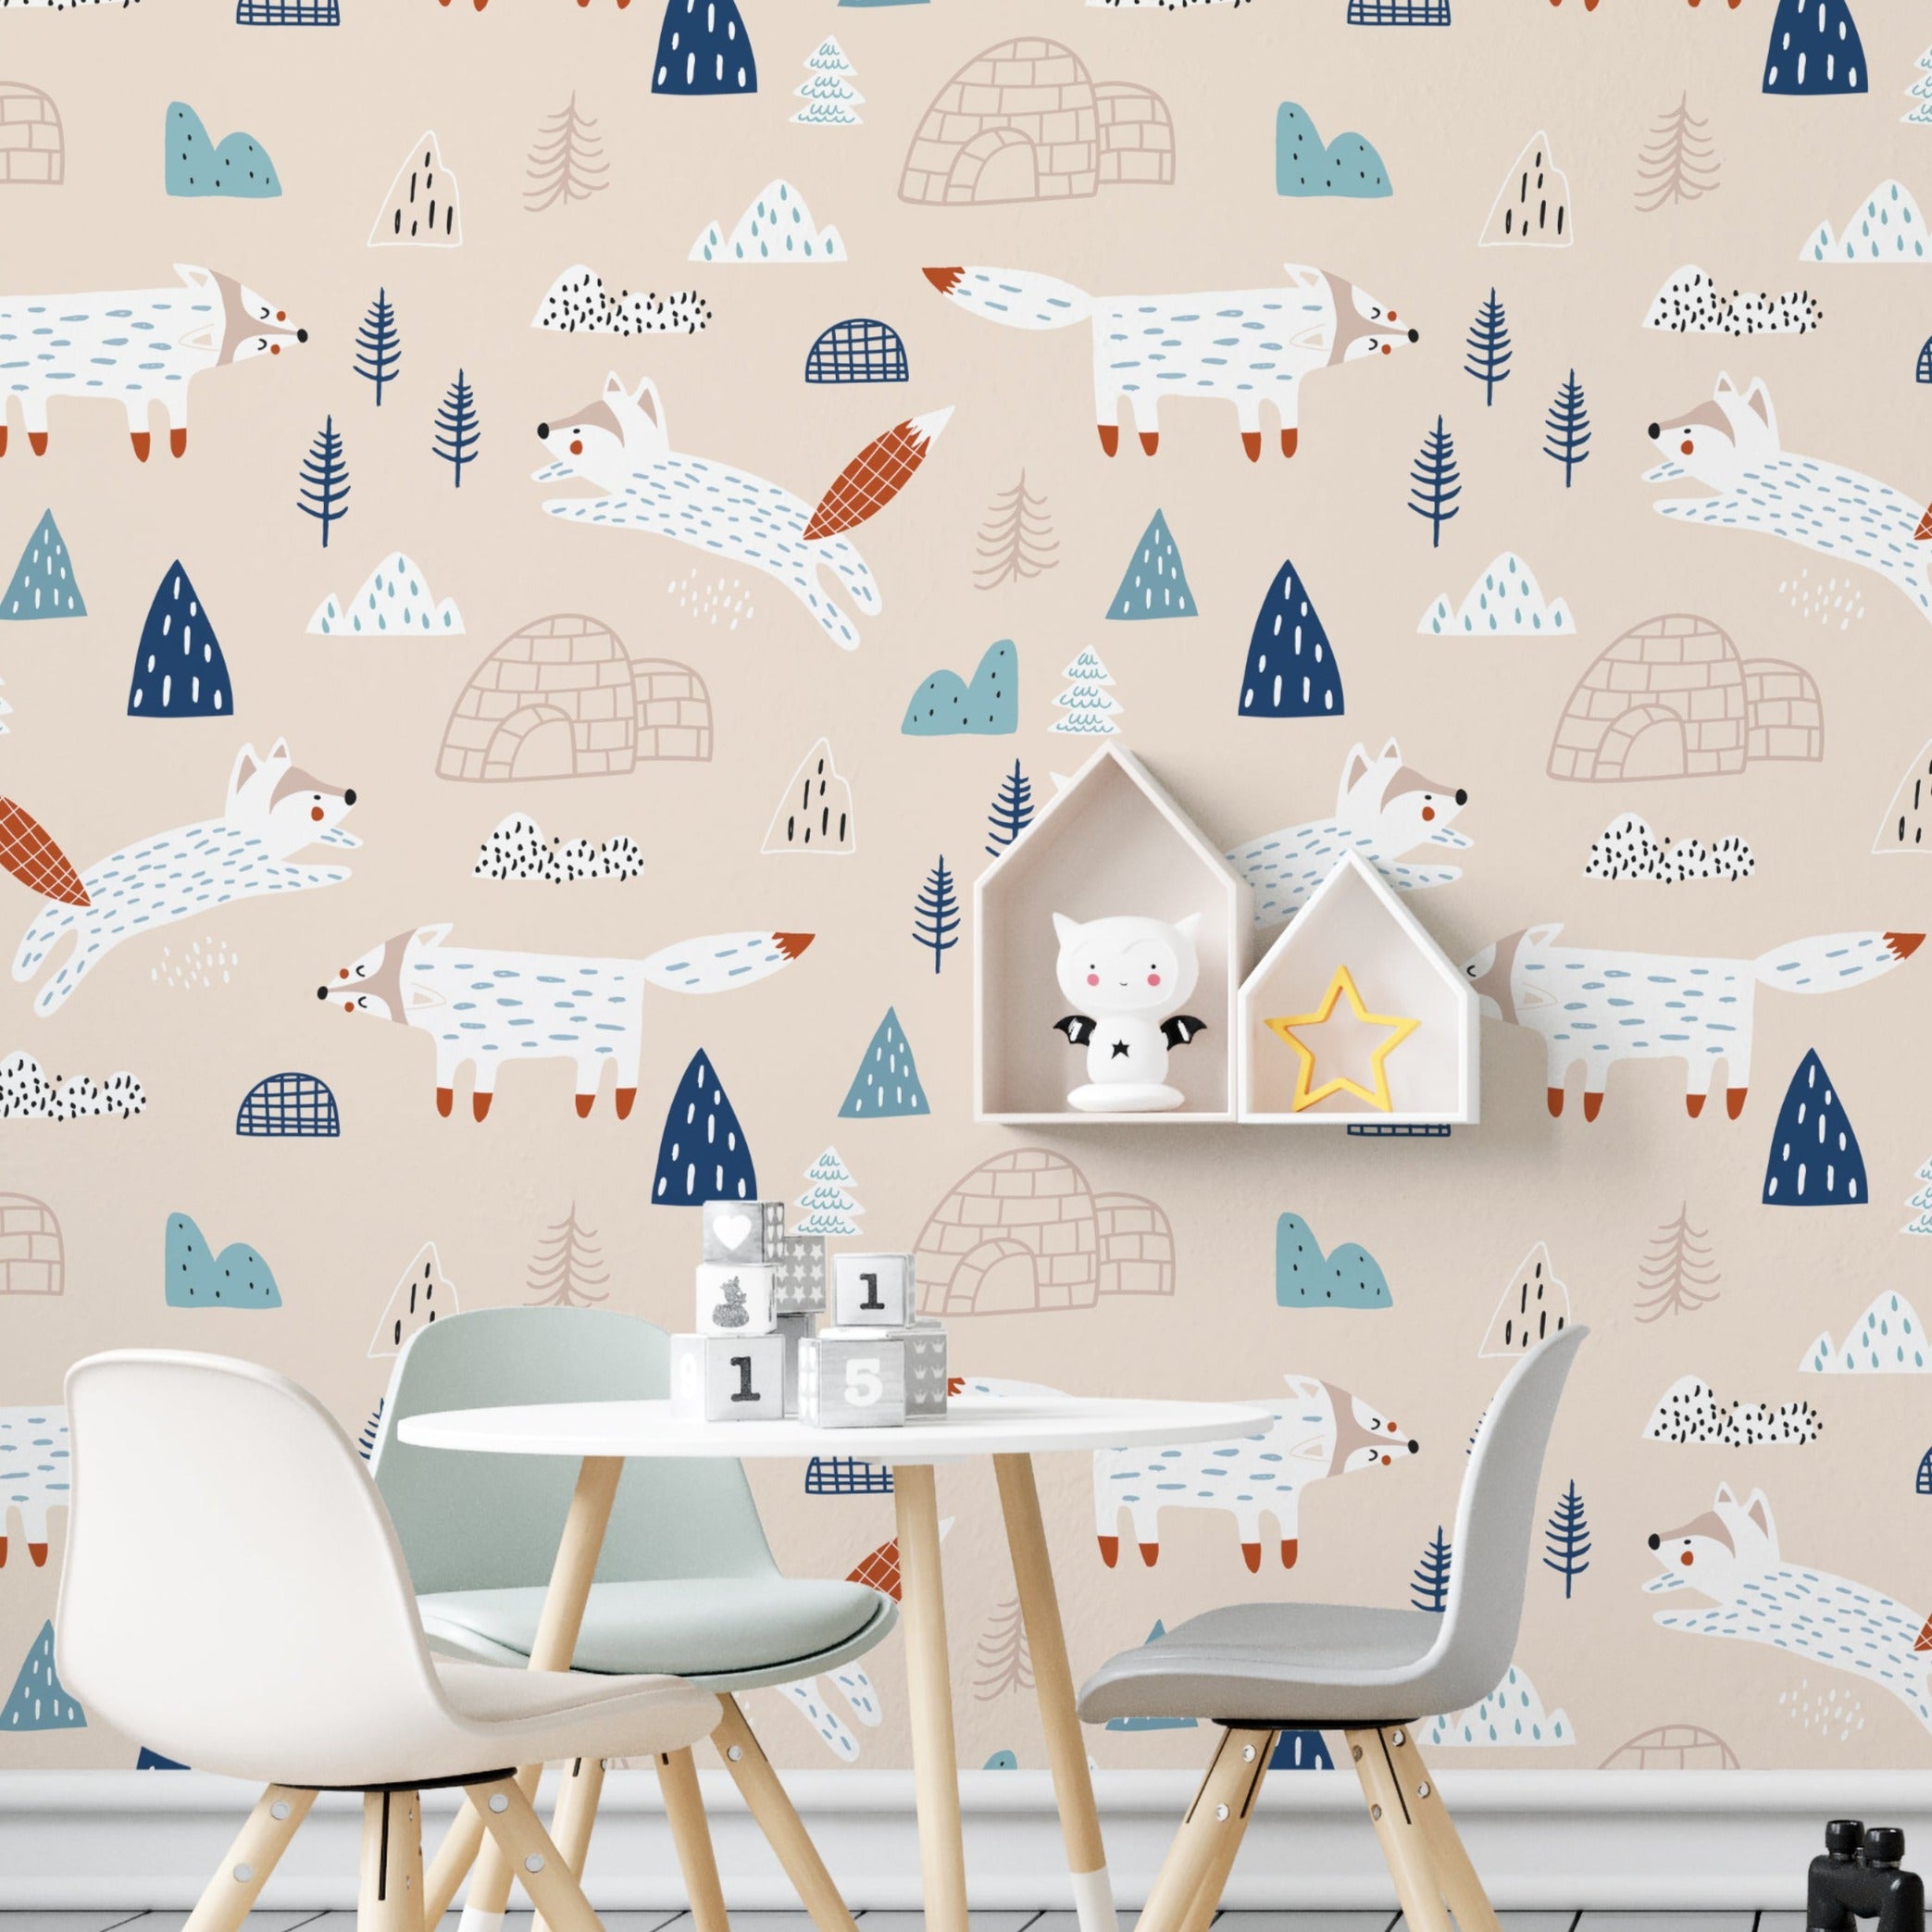 A child's study area with walls covered in "Nordic Fox Wallpaper" showing a charming scene of blue and white foxes, small igloos, and stylized trees on a beige backdrop. The setting includes a small table and chairs, and a white bed, enhancing the room's whimsical and educational atmosphere.